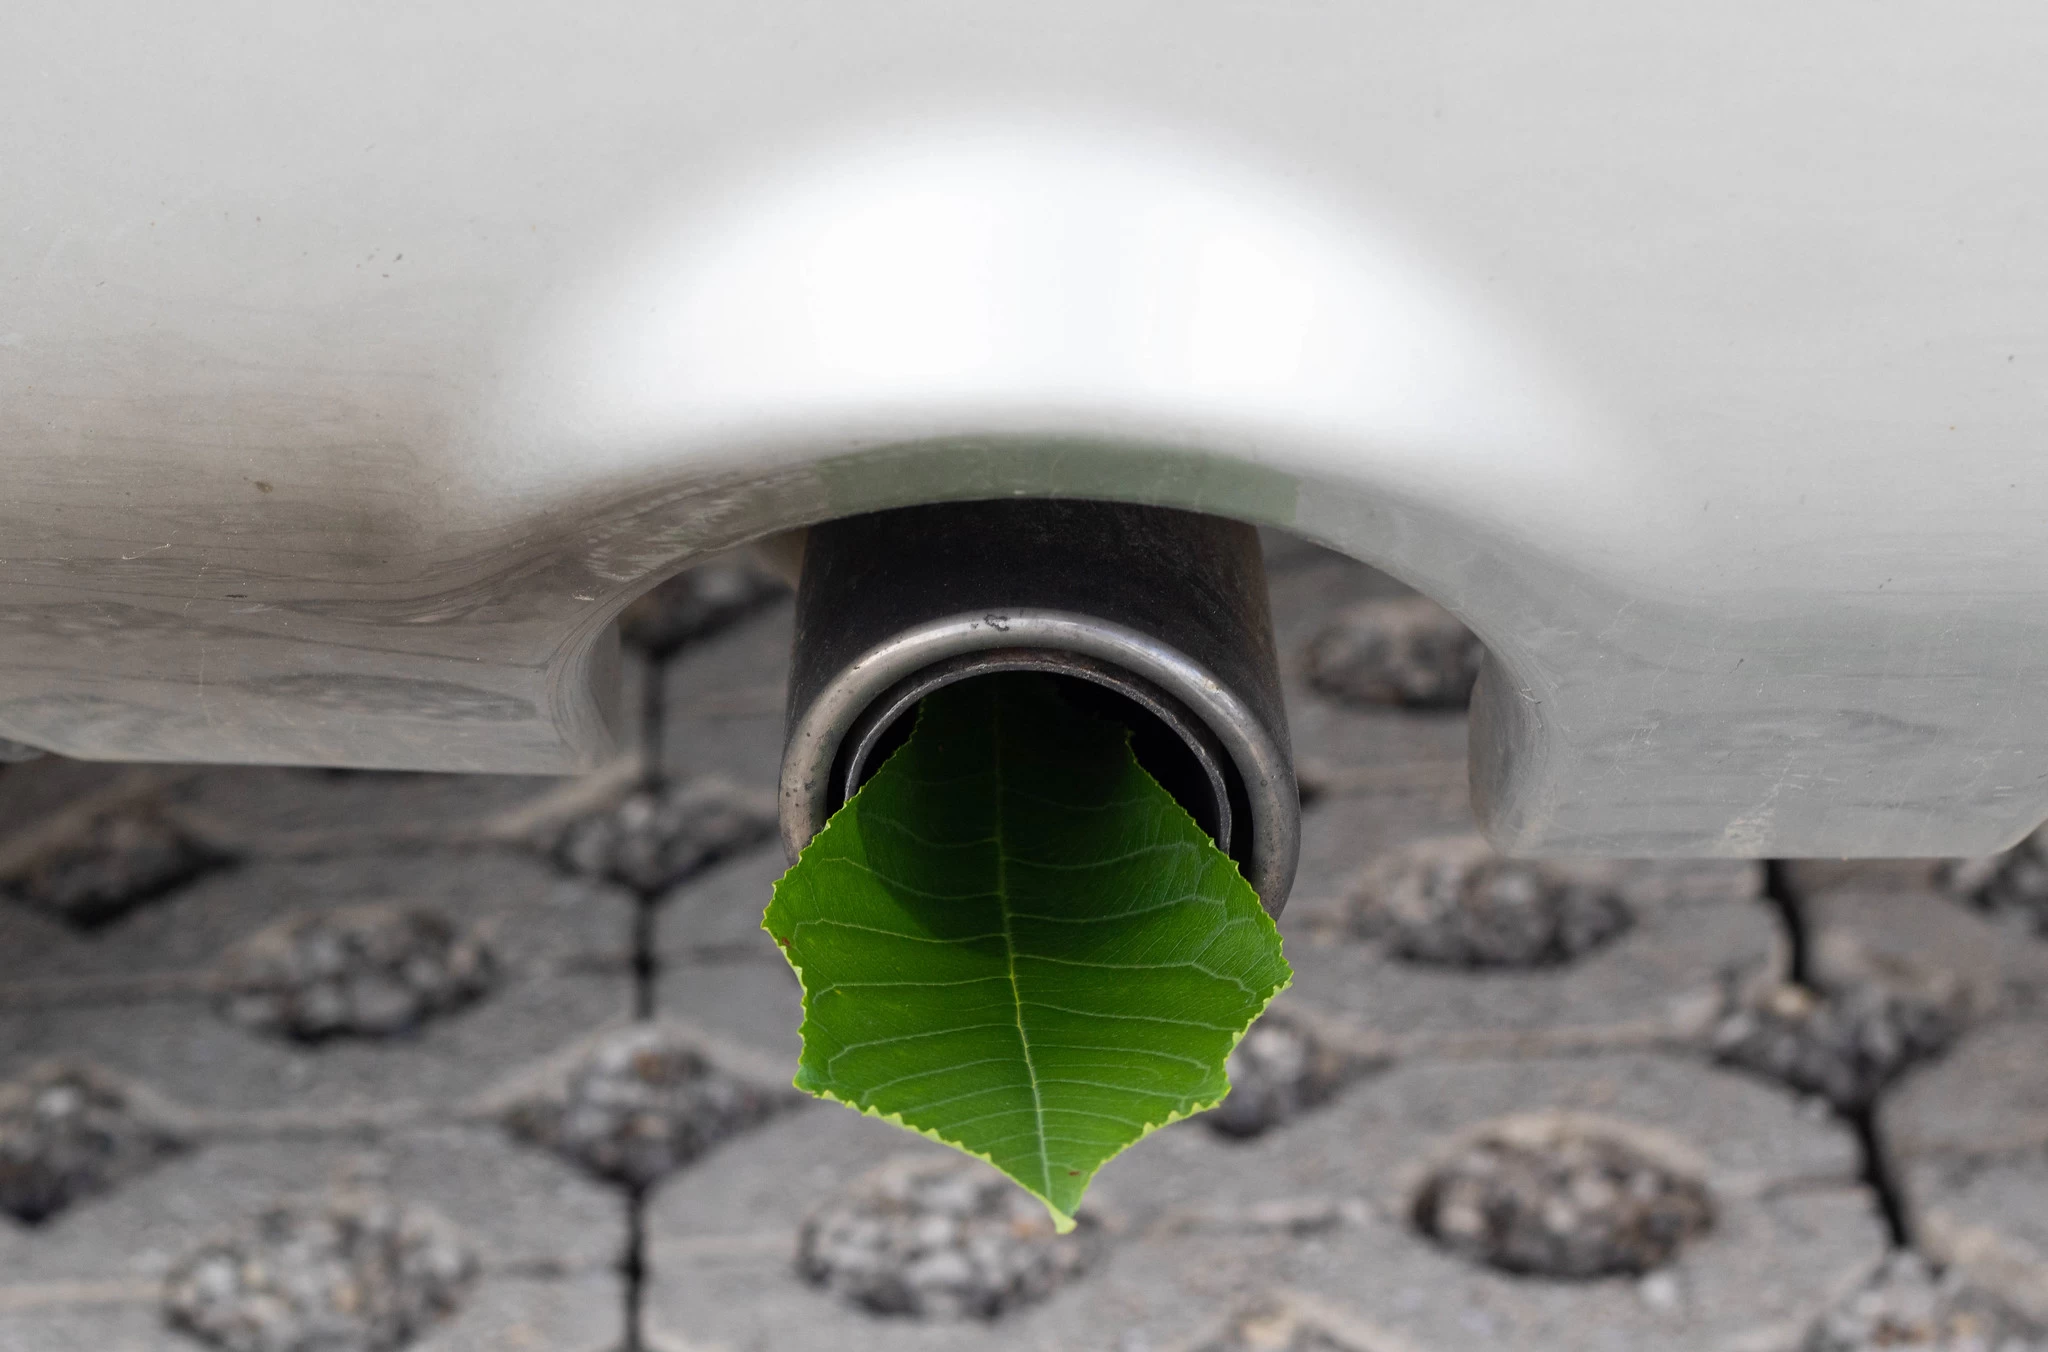 Hybrids with ethanol present a compelling case for decarbonisation